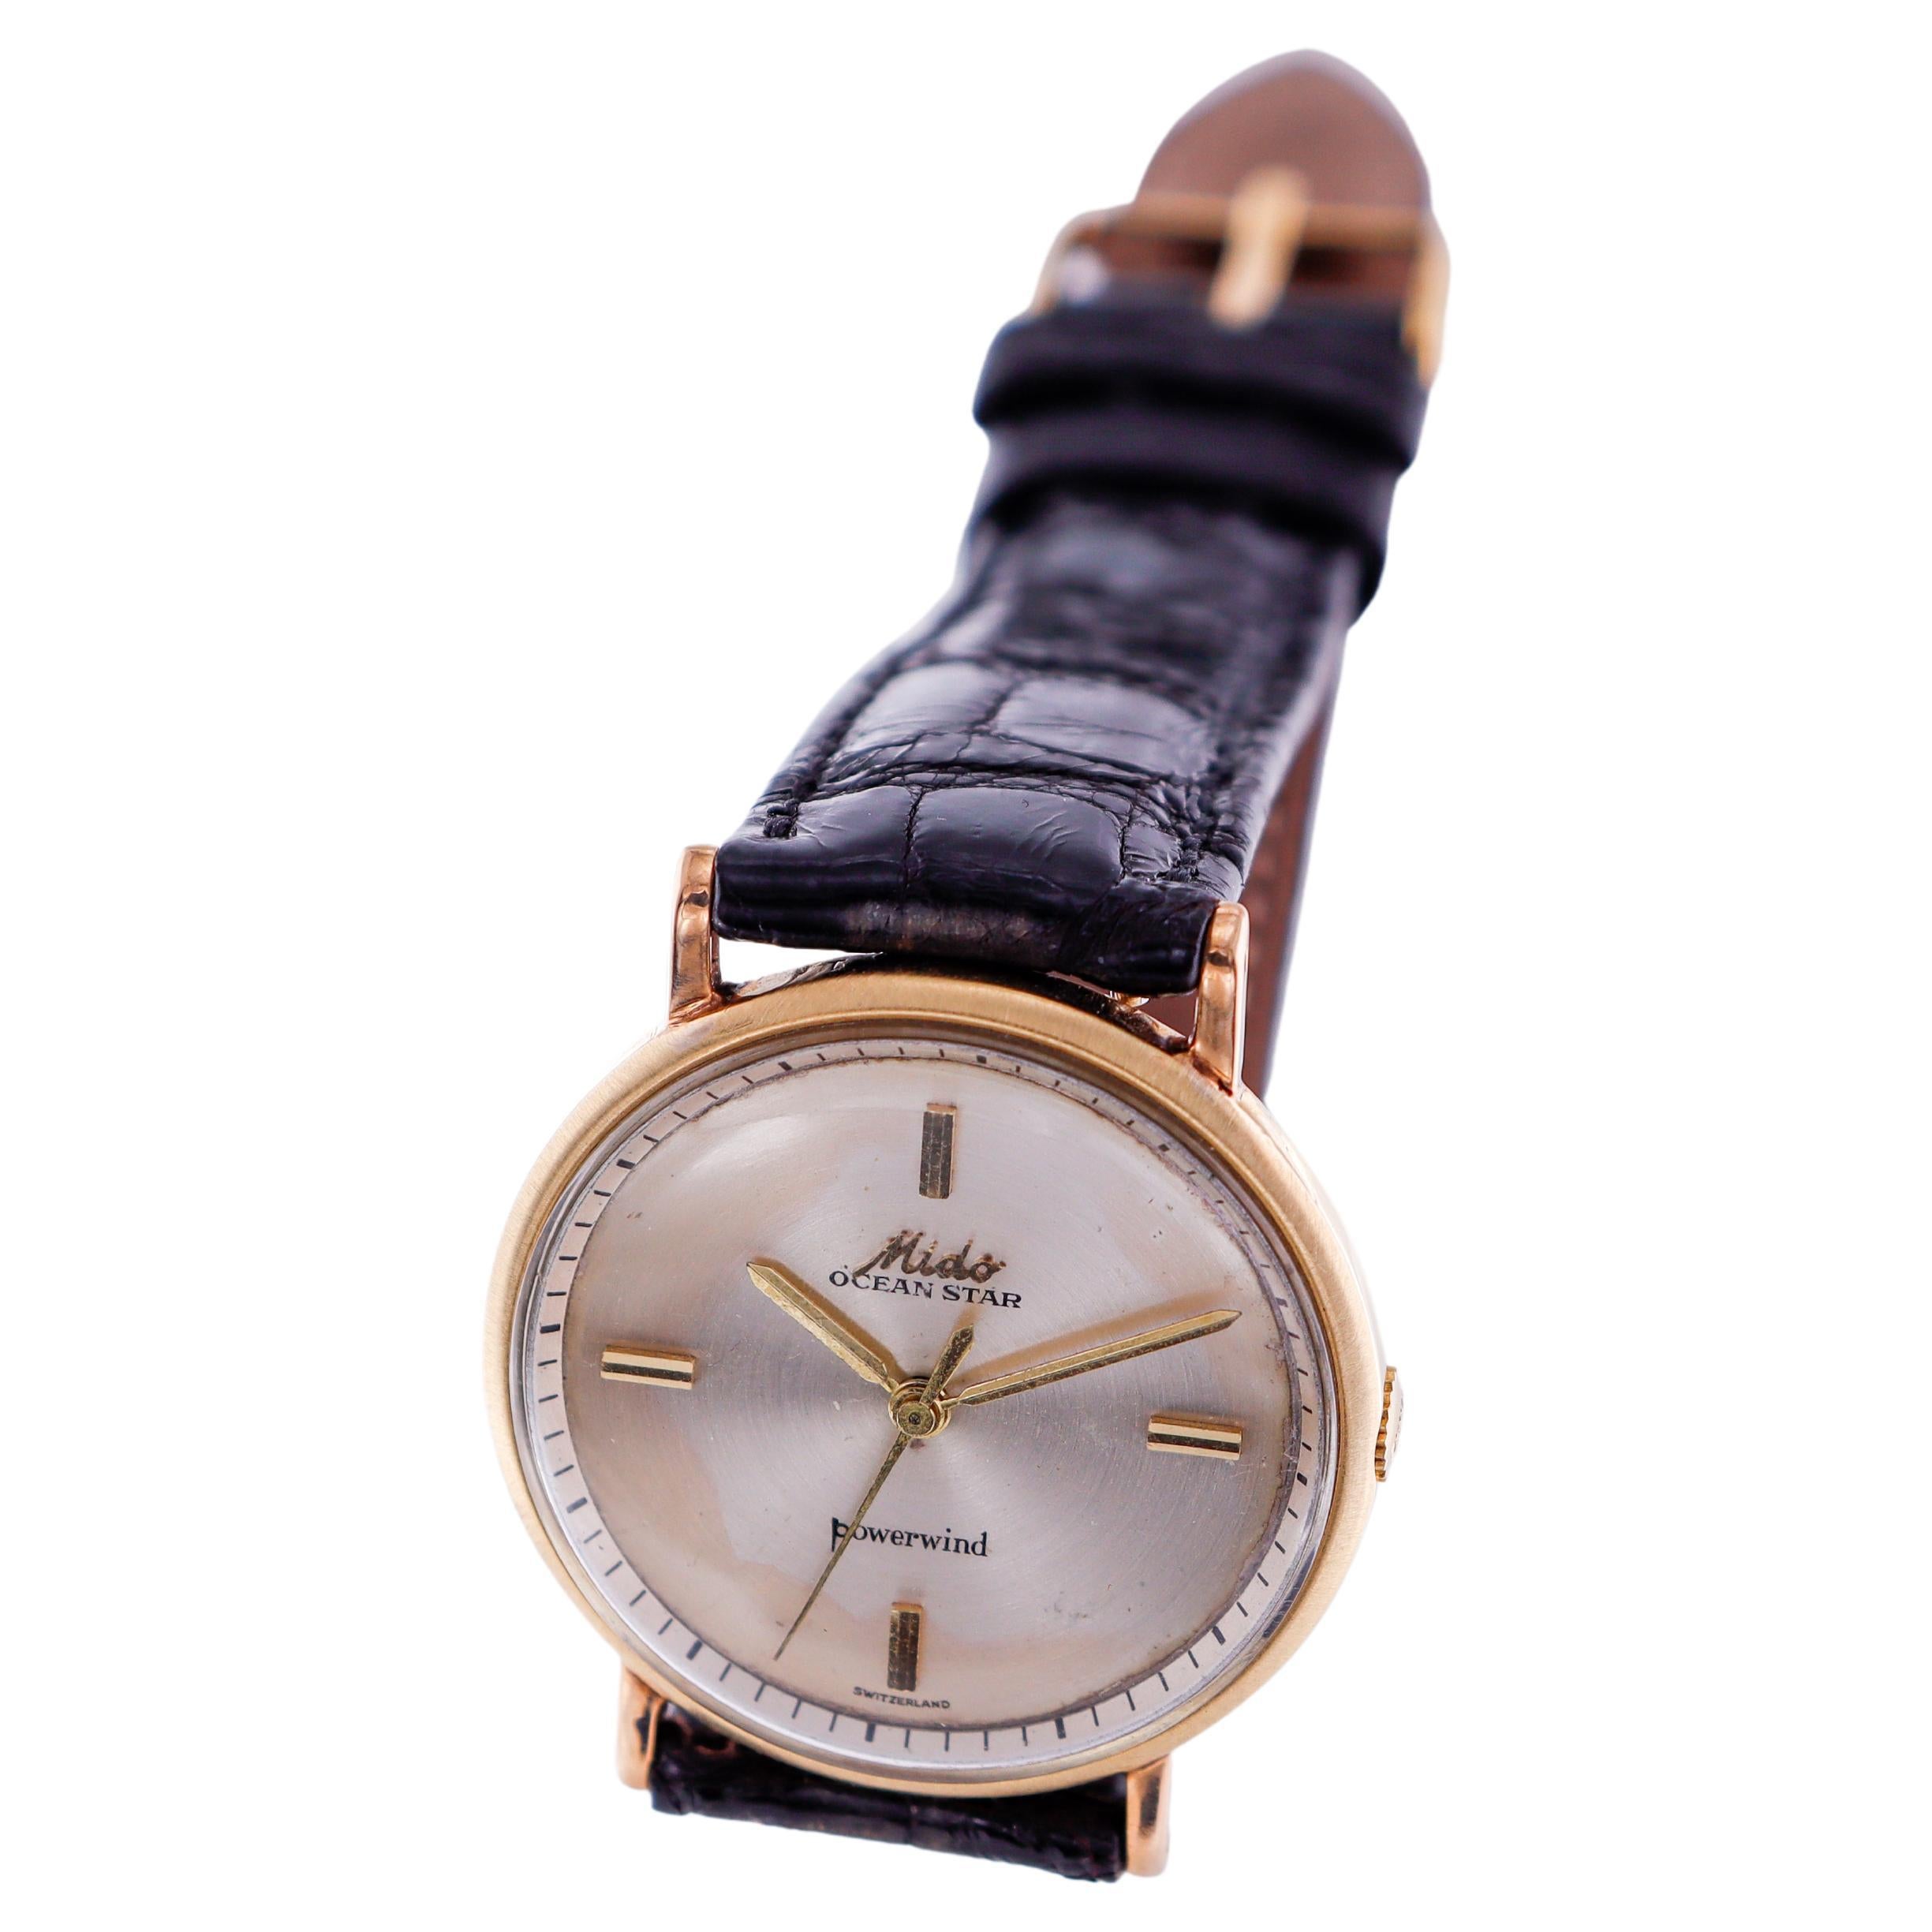 Mido 14Kt. Yellow Gold Ocean Star Art Deco Style Power Wind Watch, circa 1950s In Excellent Condition For Sale In Long Beach, CA